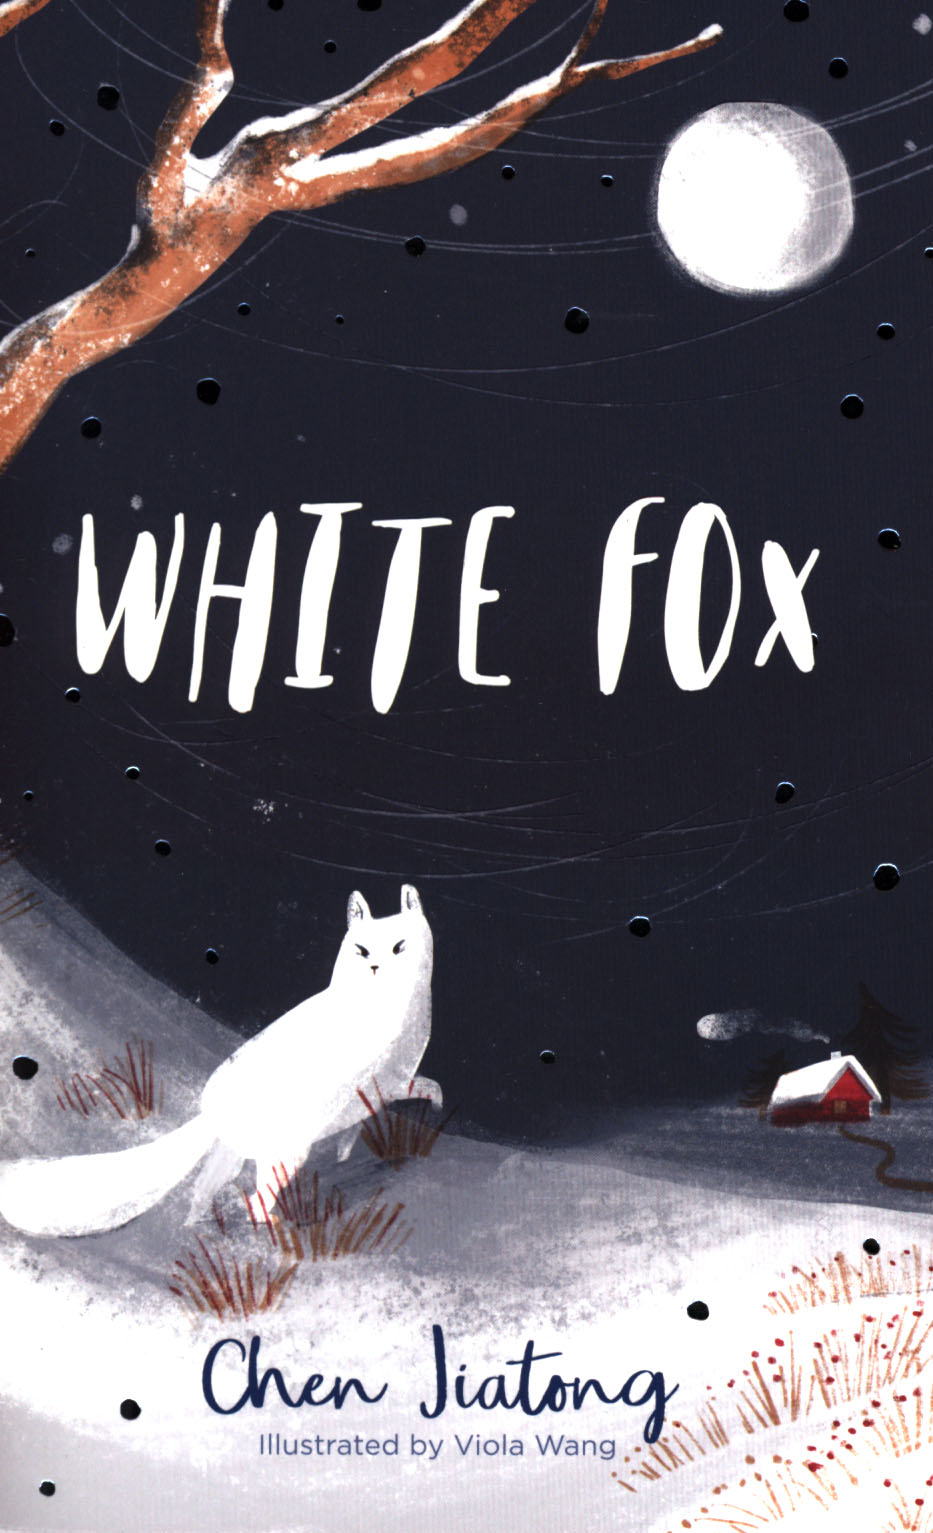 Cover for White Fox featuring an illustration of a white fox on a snowy night running to a house in the distance with a tree above them and the moon in the sky.